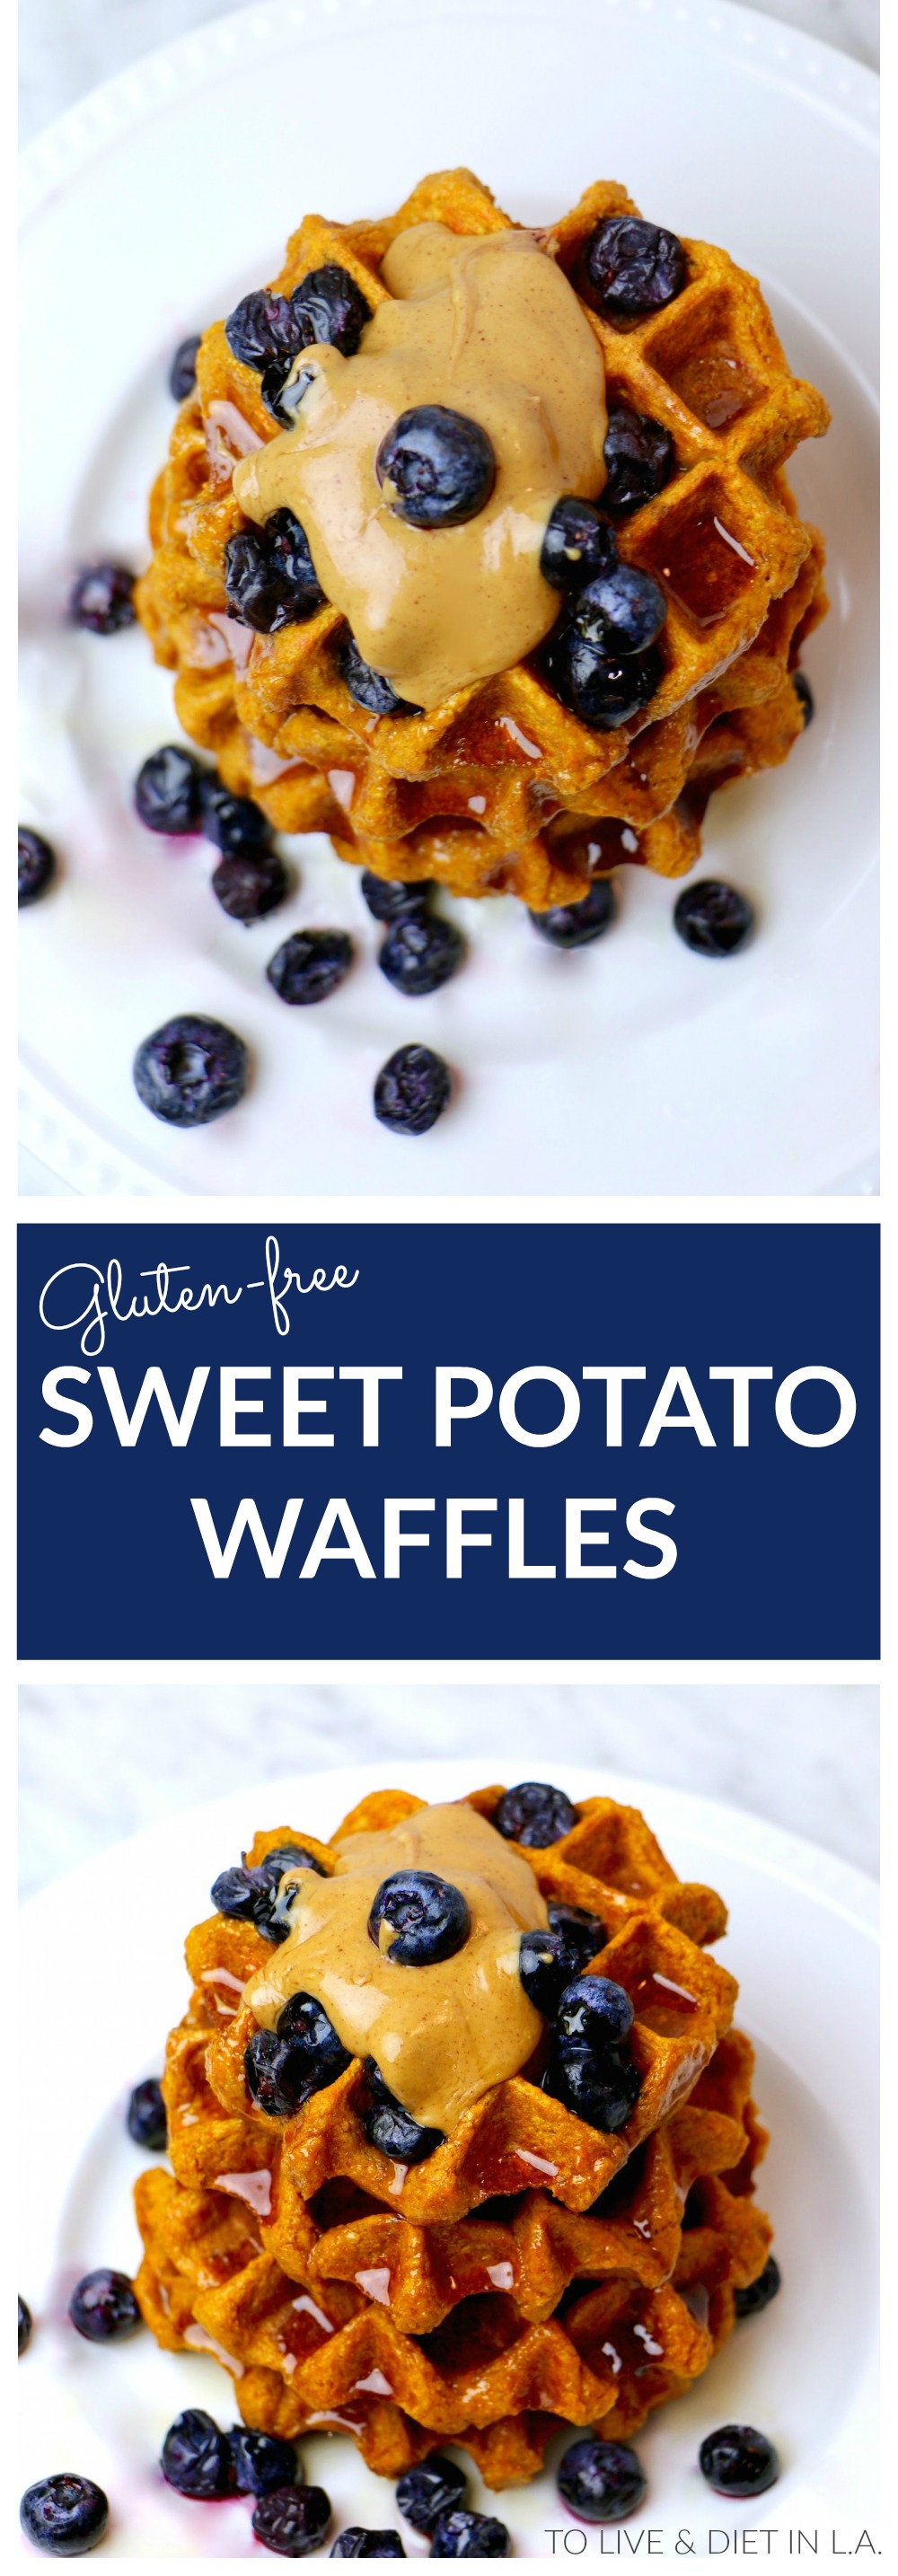 Healthy Sweet Potato Belgium Waffles made with oat flour, sweet potatoes, and whole healthy ingredients! Gluten-free - can be made vegan. #breakfast #waffles #healthyrecipes